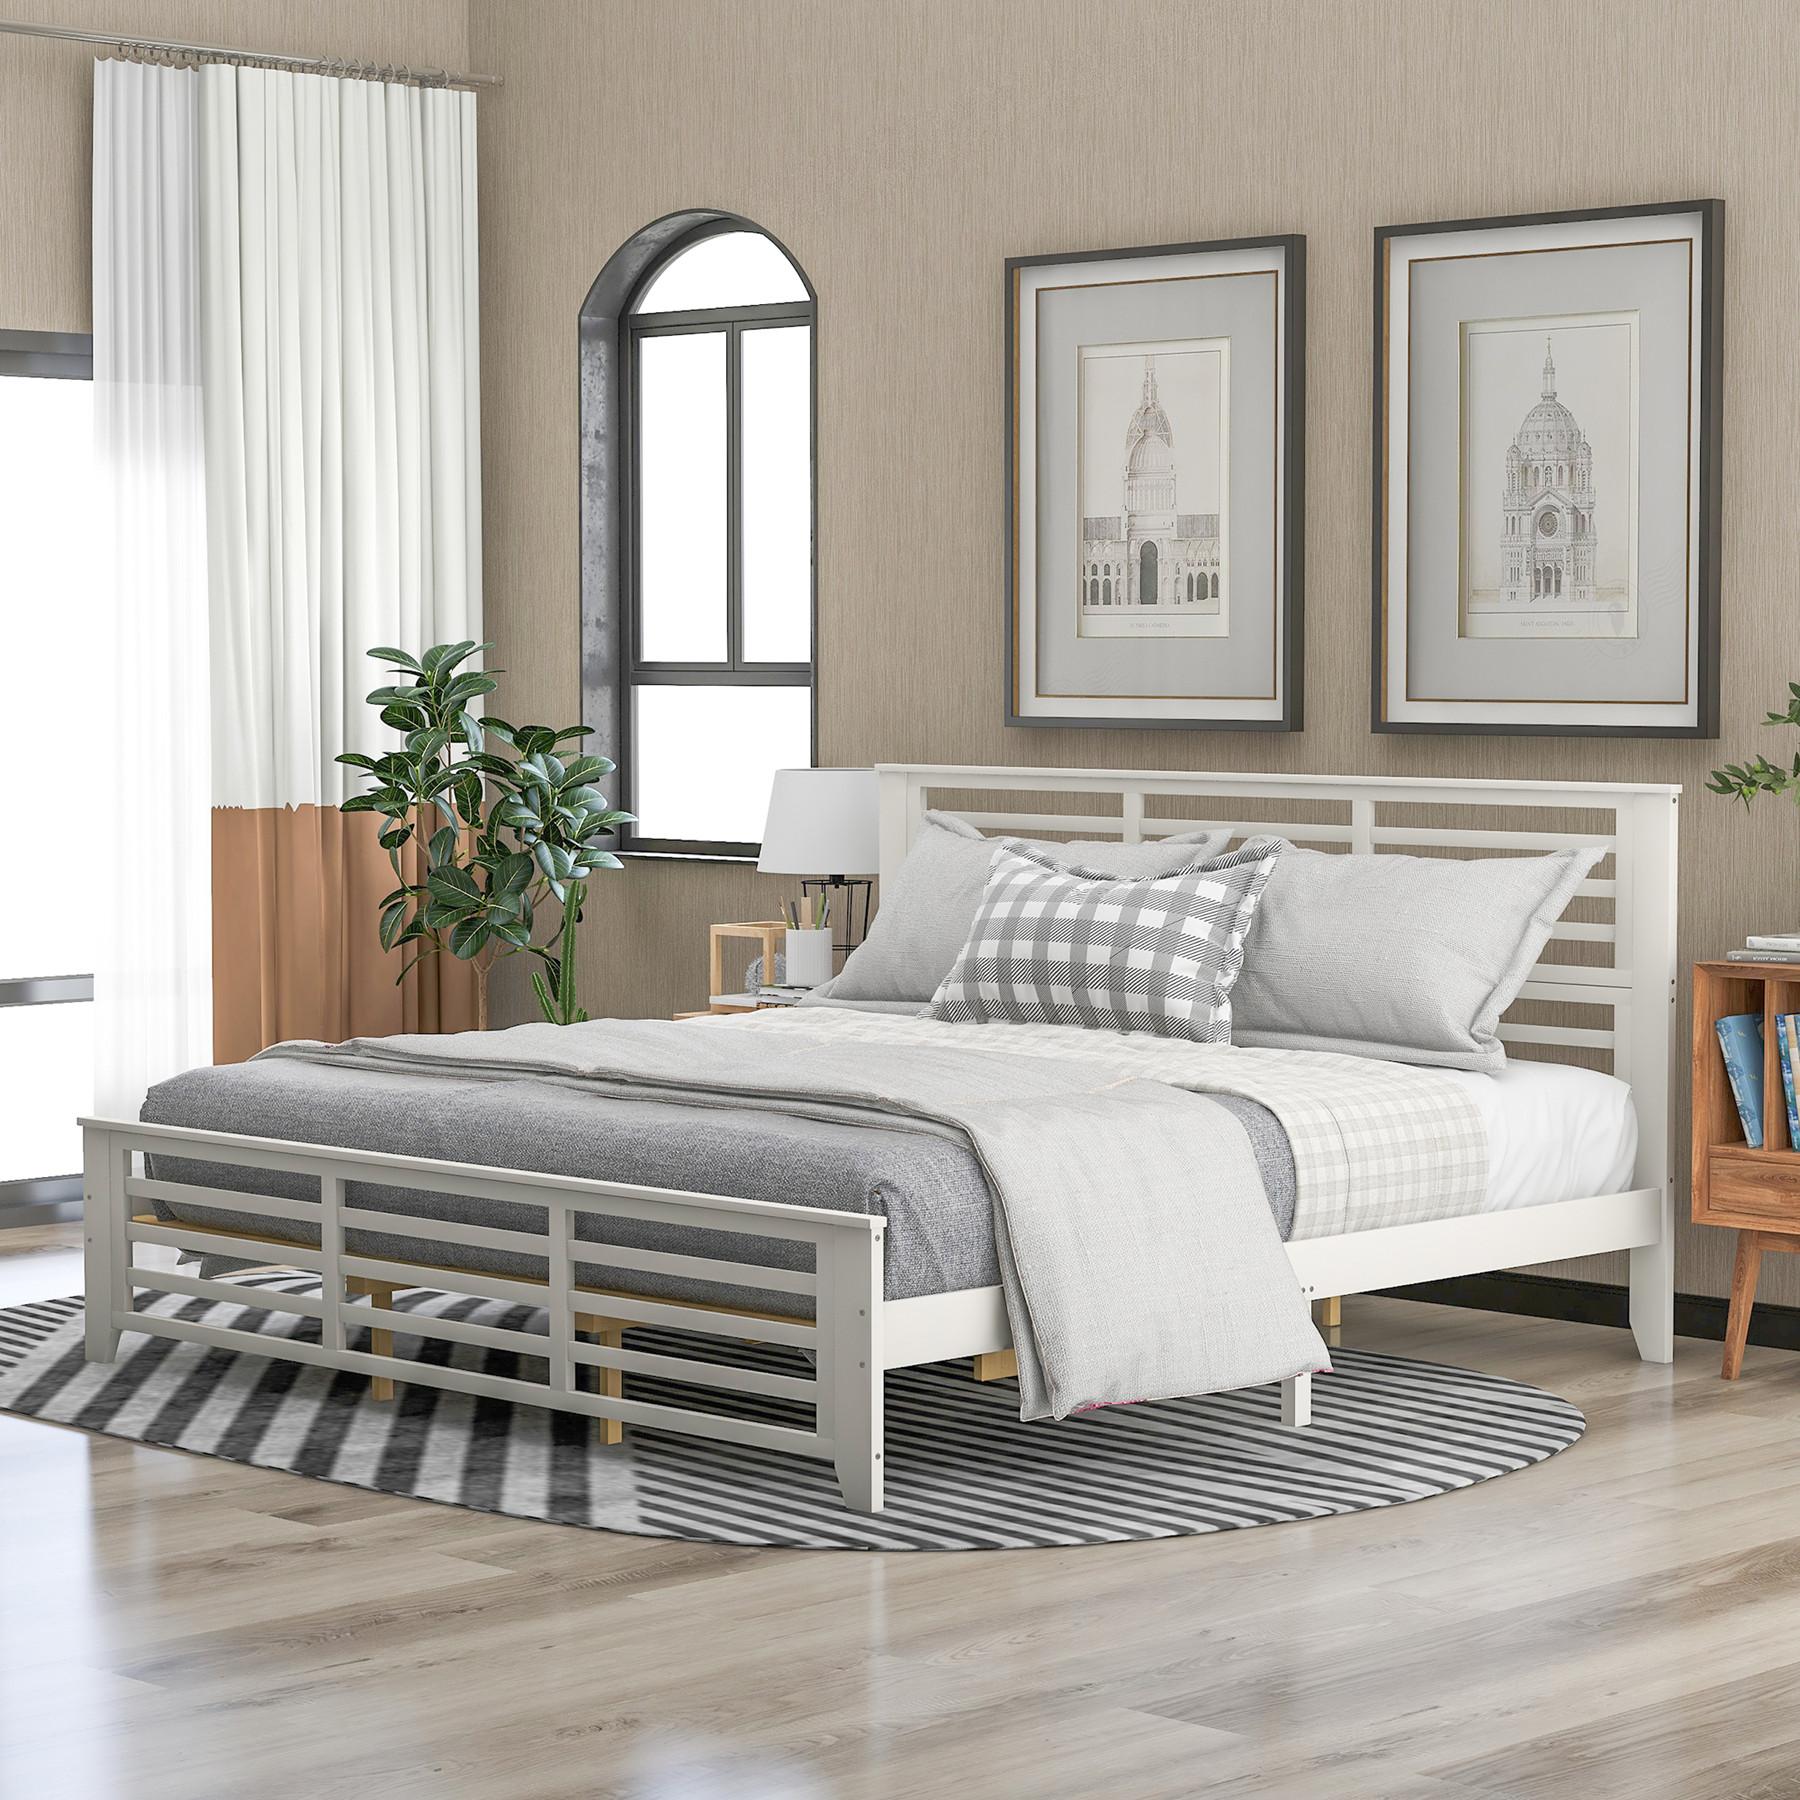 King Size Wood Platform Bed Frame with Headboard and Footboard, Solid Wood Foundation with Slat Support, White 79.9x80.7x41.3inch - image 1 of 7